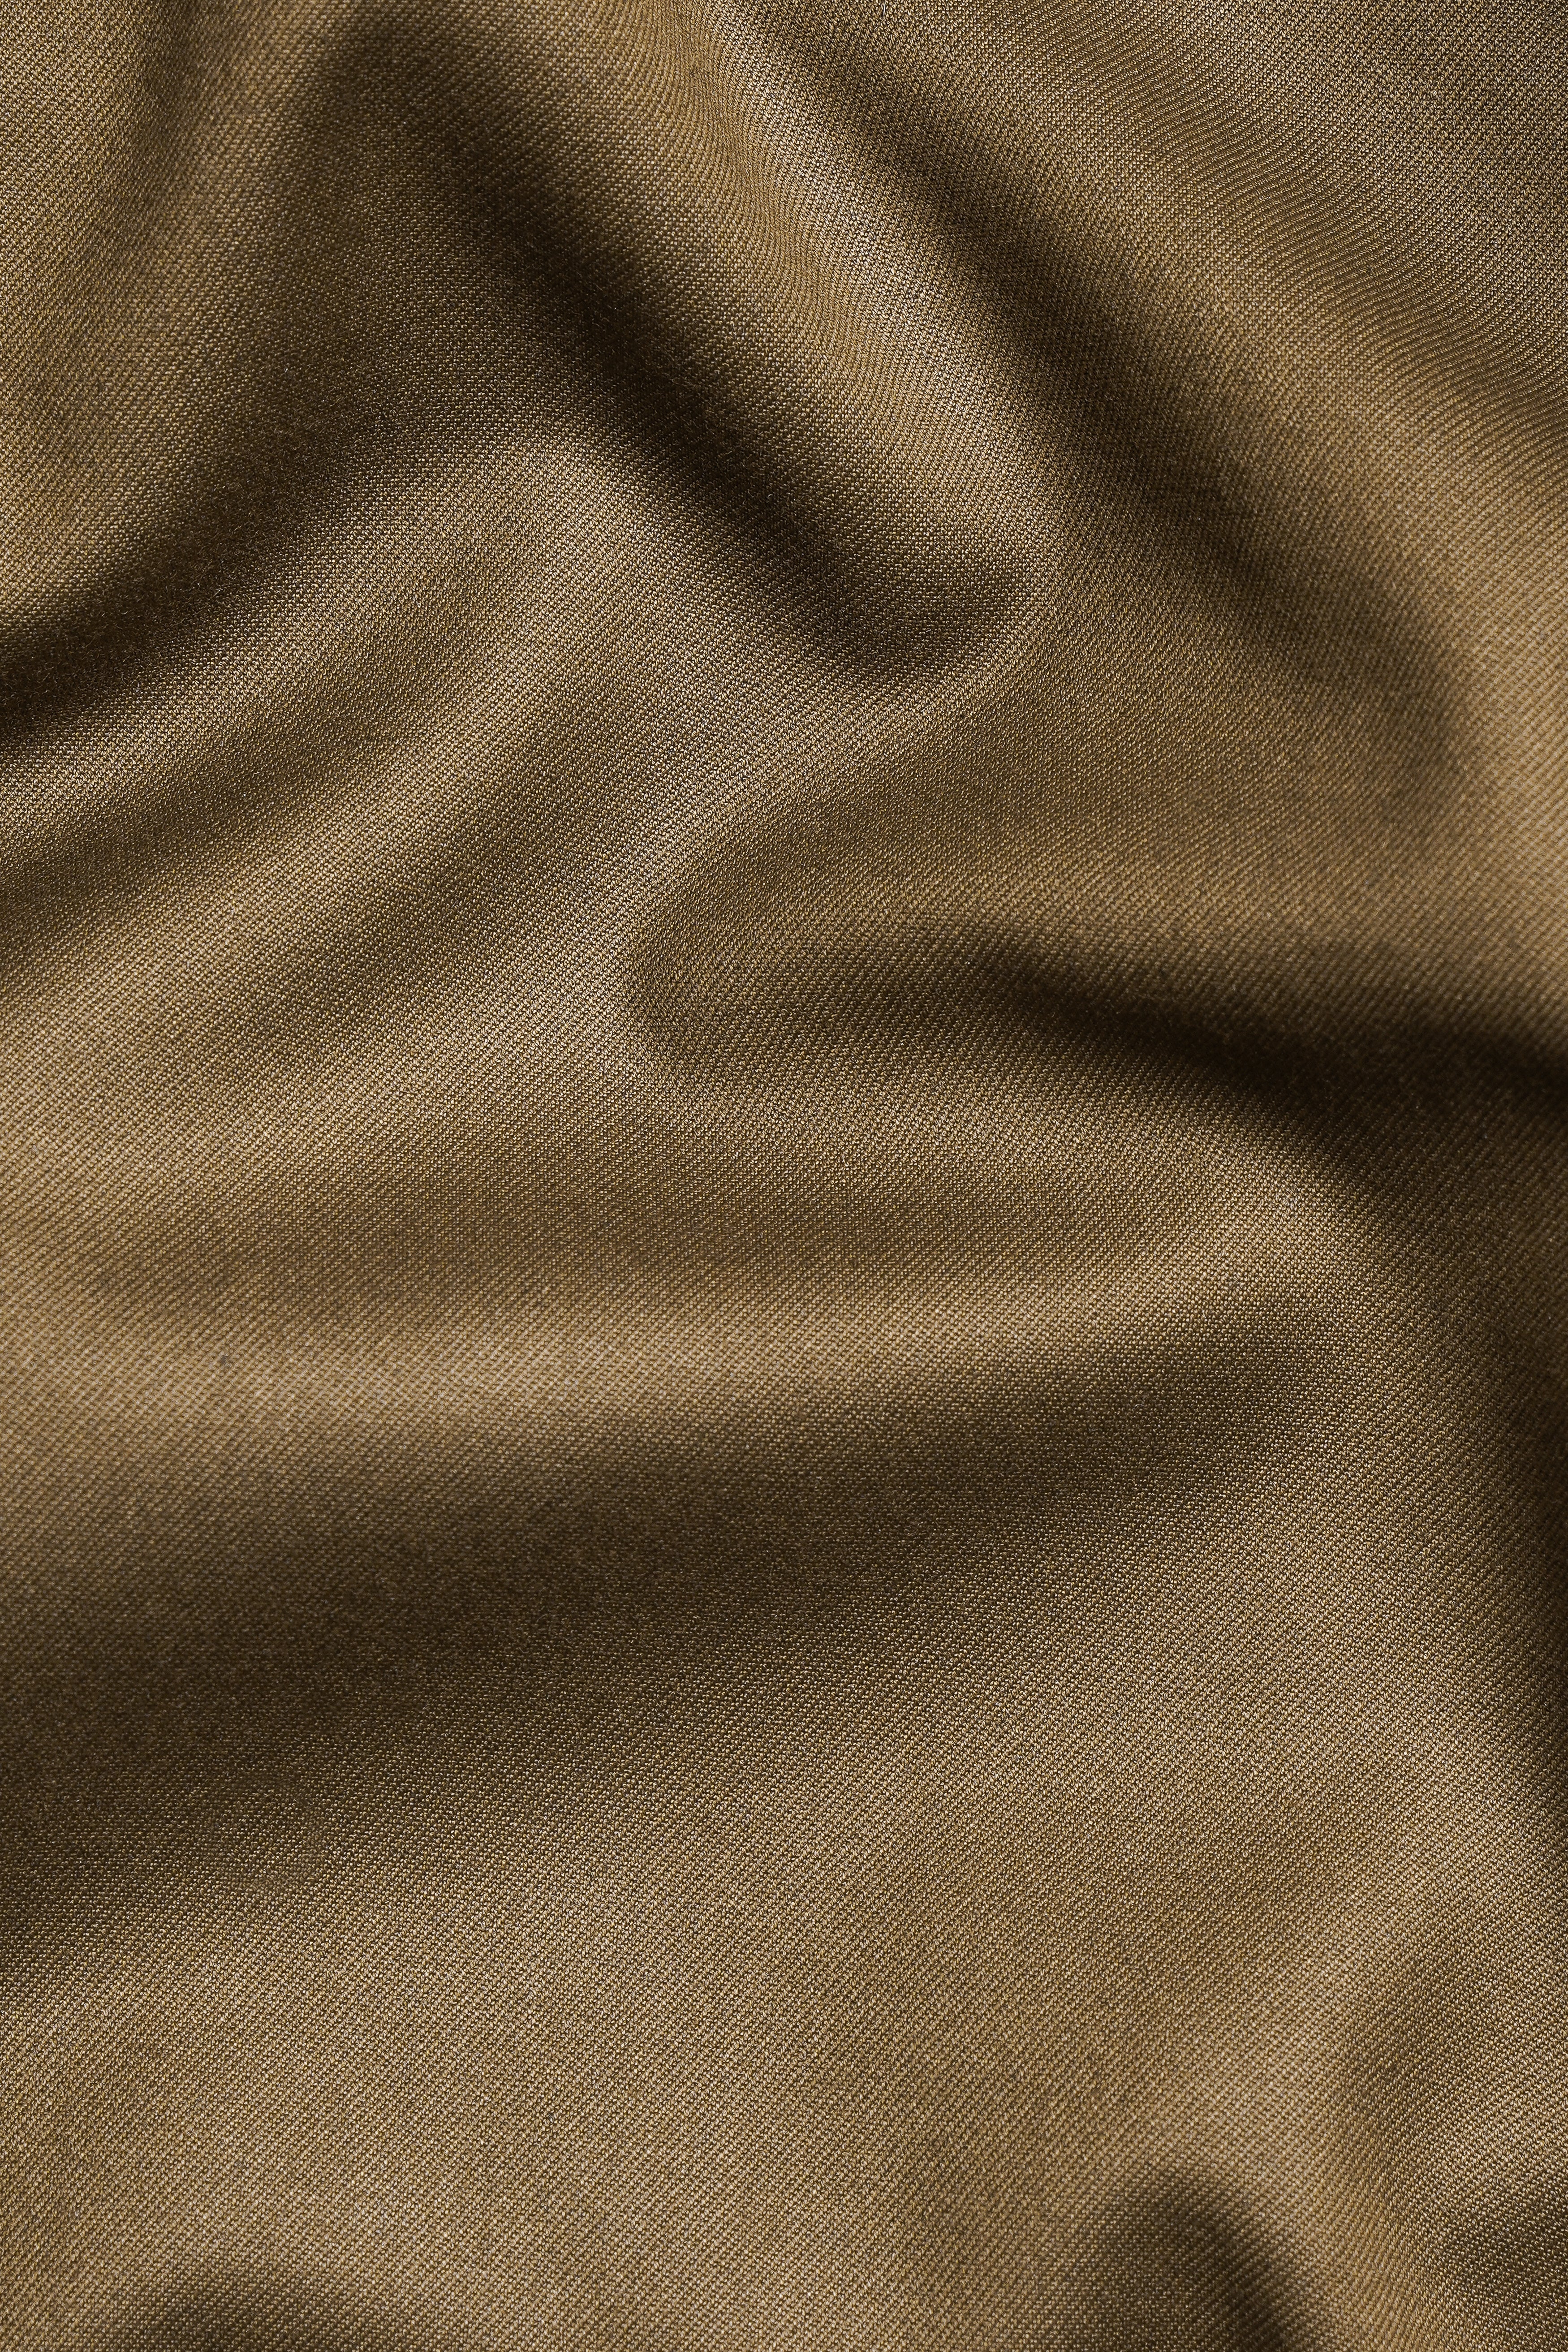 Tortilla Brown Wool Rich Single Breasted Suit ST3068-SB-36, ST3068-SB-38, ST3068-SB-40, ST3068-SB-42, ST3068-SB-44, ST3068-SB-46, ST3068-SB-48, ST3068-SB-50, ST3068-SB-52, ST3068-SB-54, ST3068-SB-56, ST3068-SB-58, ST3068-SB-60